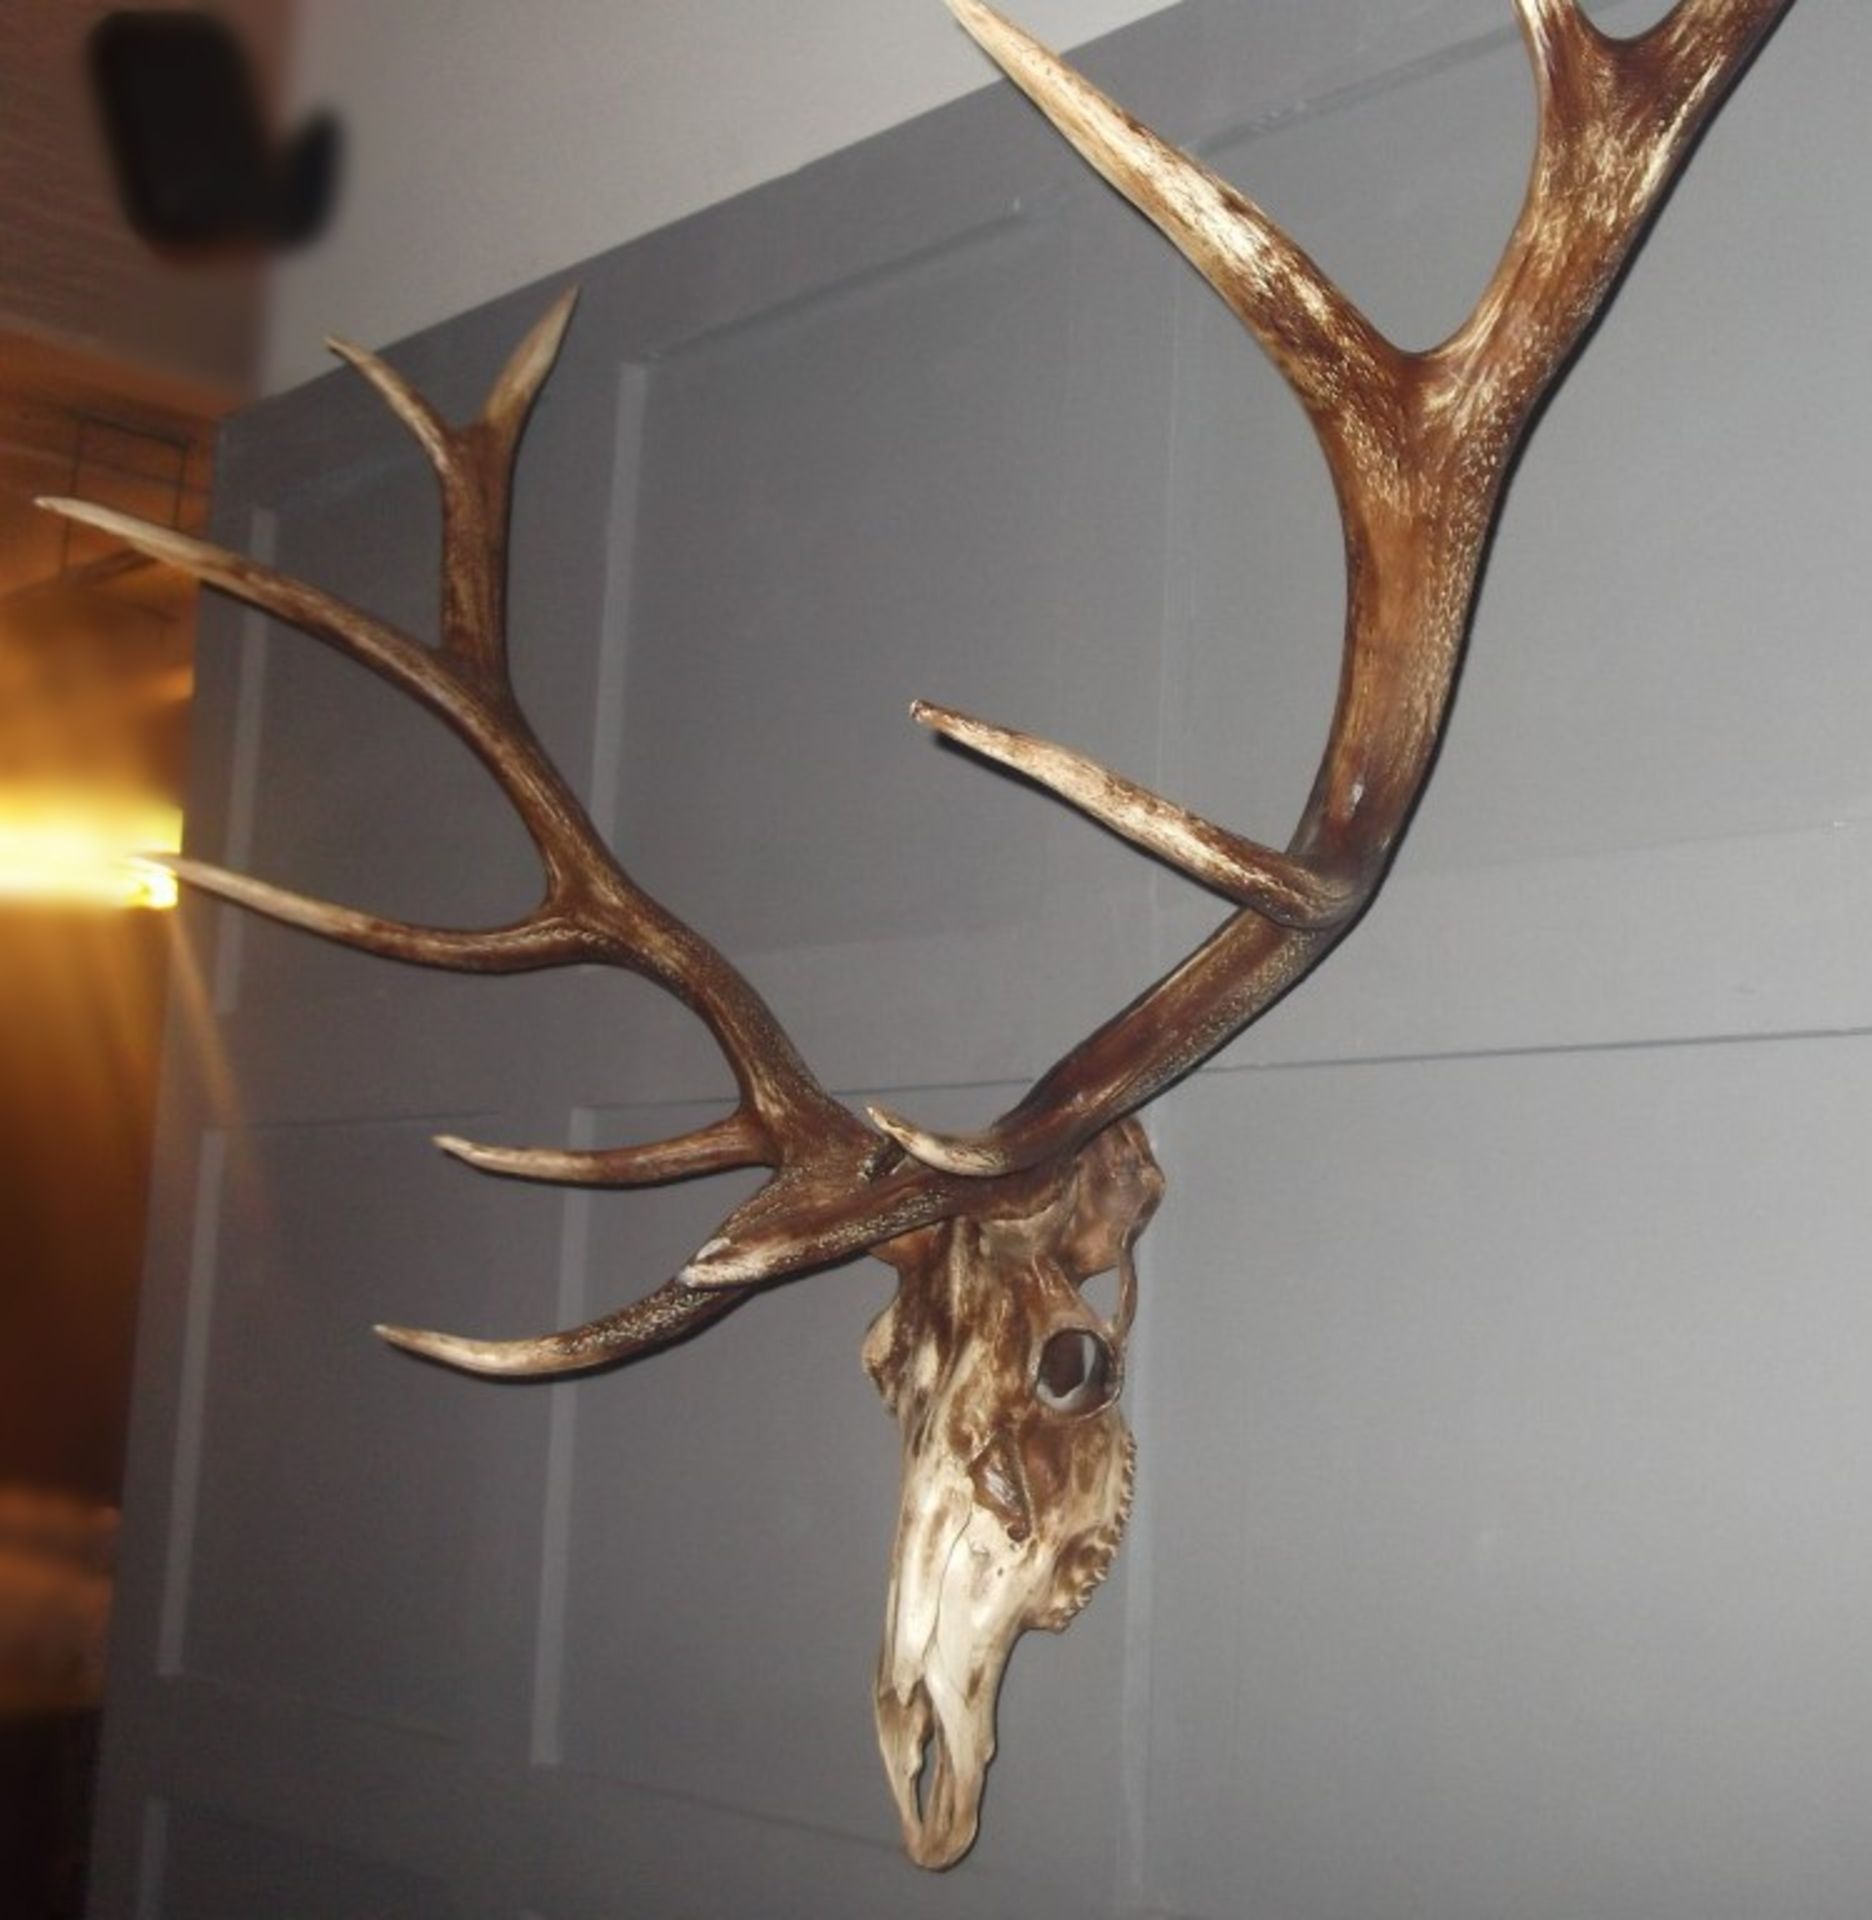 1 x Trophy Deer Skull Wall - Art Decoration - New / Unsuesd Stock - Very Realistic Faux Reproduction - Image 2 of 4